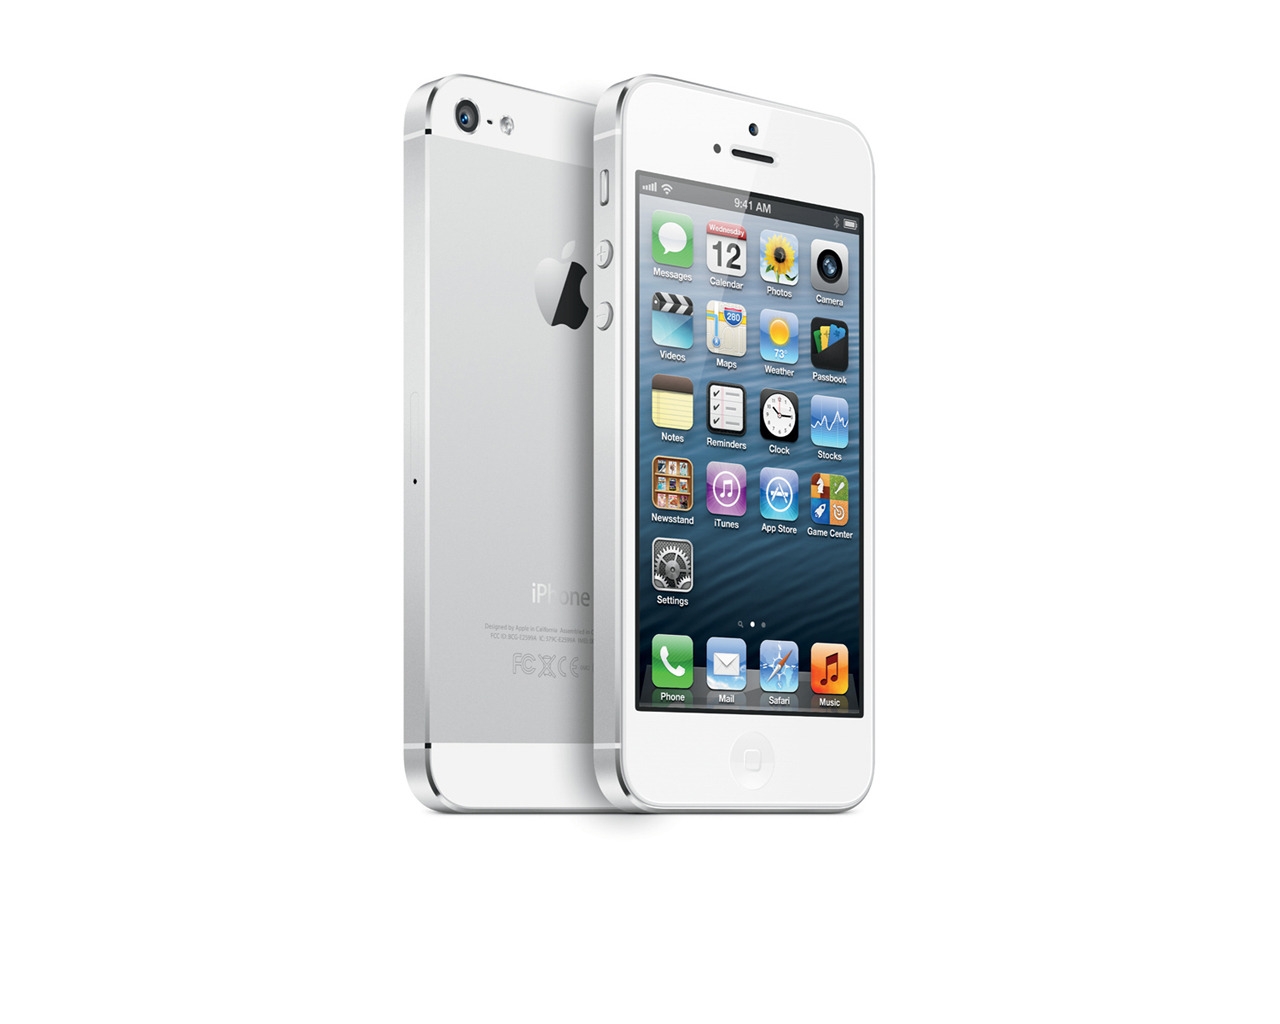 White iPhone 5 for 1280 x 1024 resolution